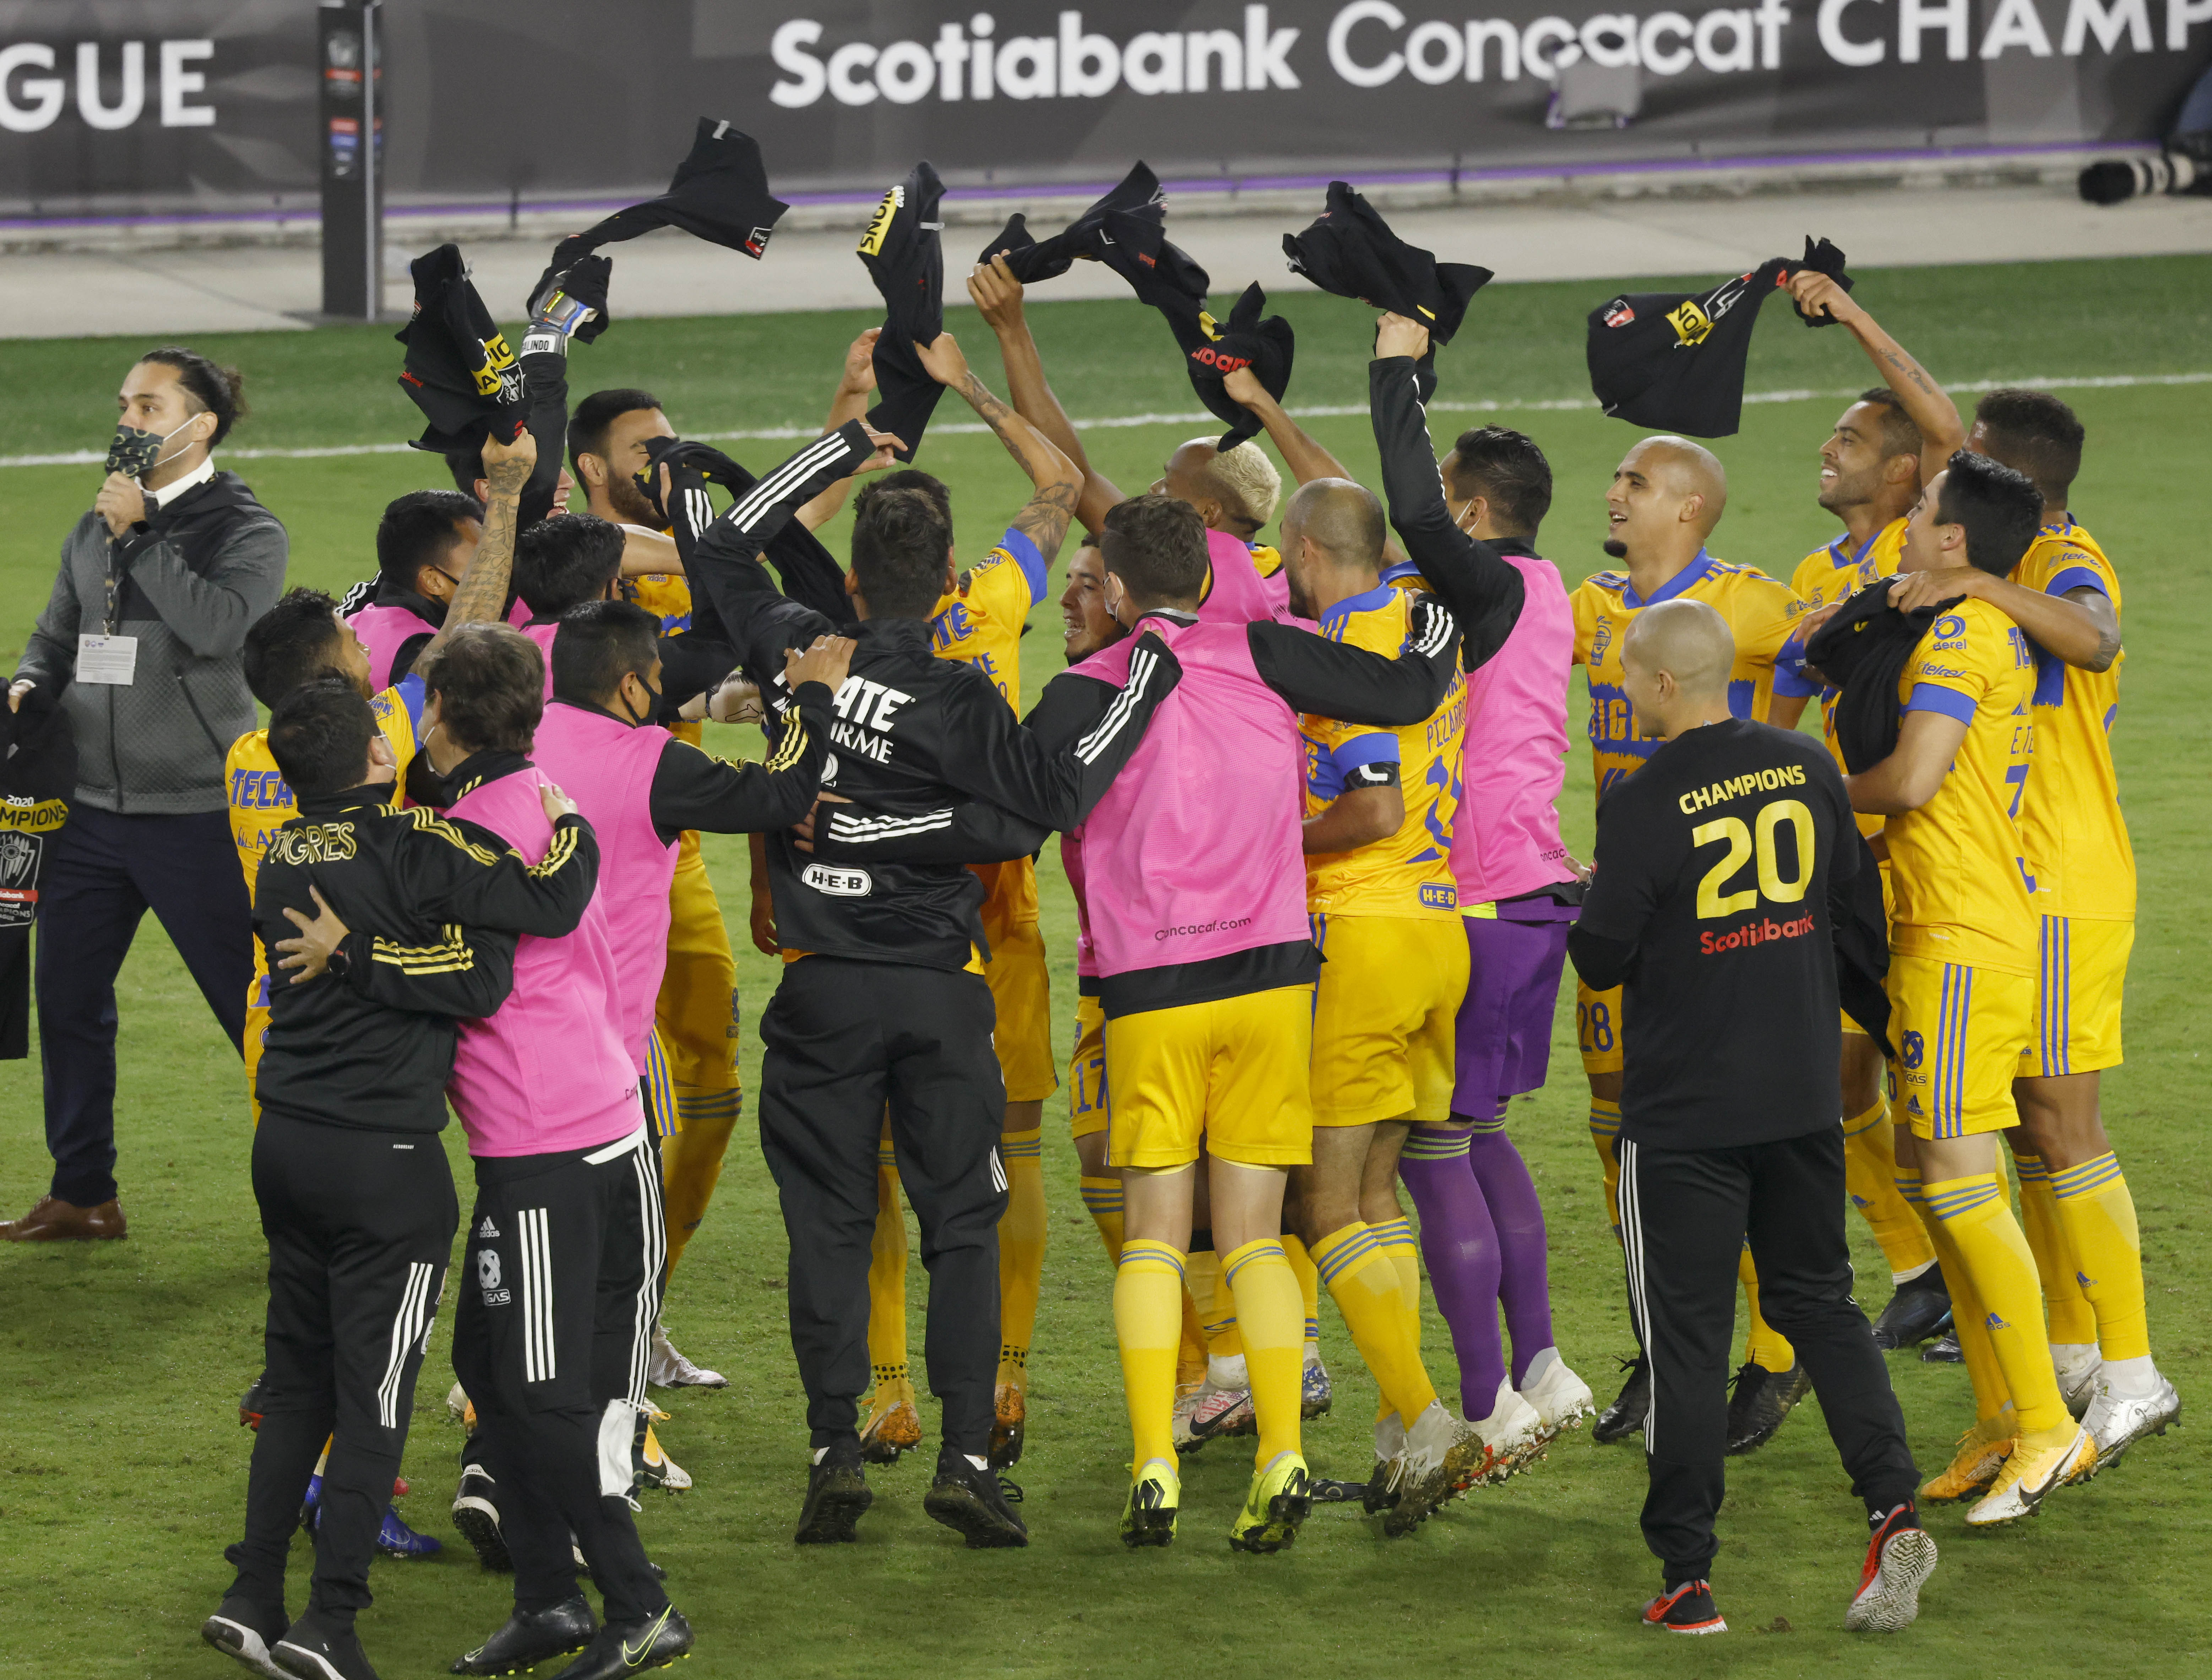 Soccer: 2020 Scotiabank Concacaf Champions League - Final-Los Angeles FC at Tigres UANL